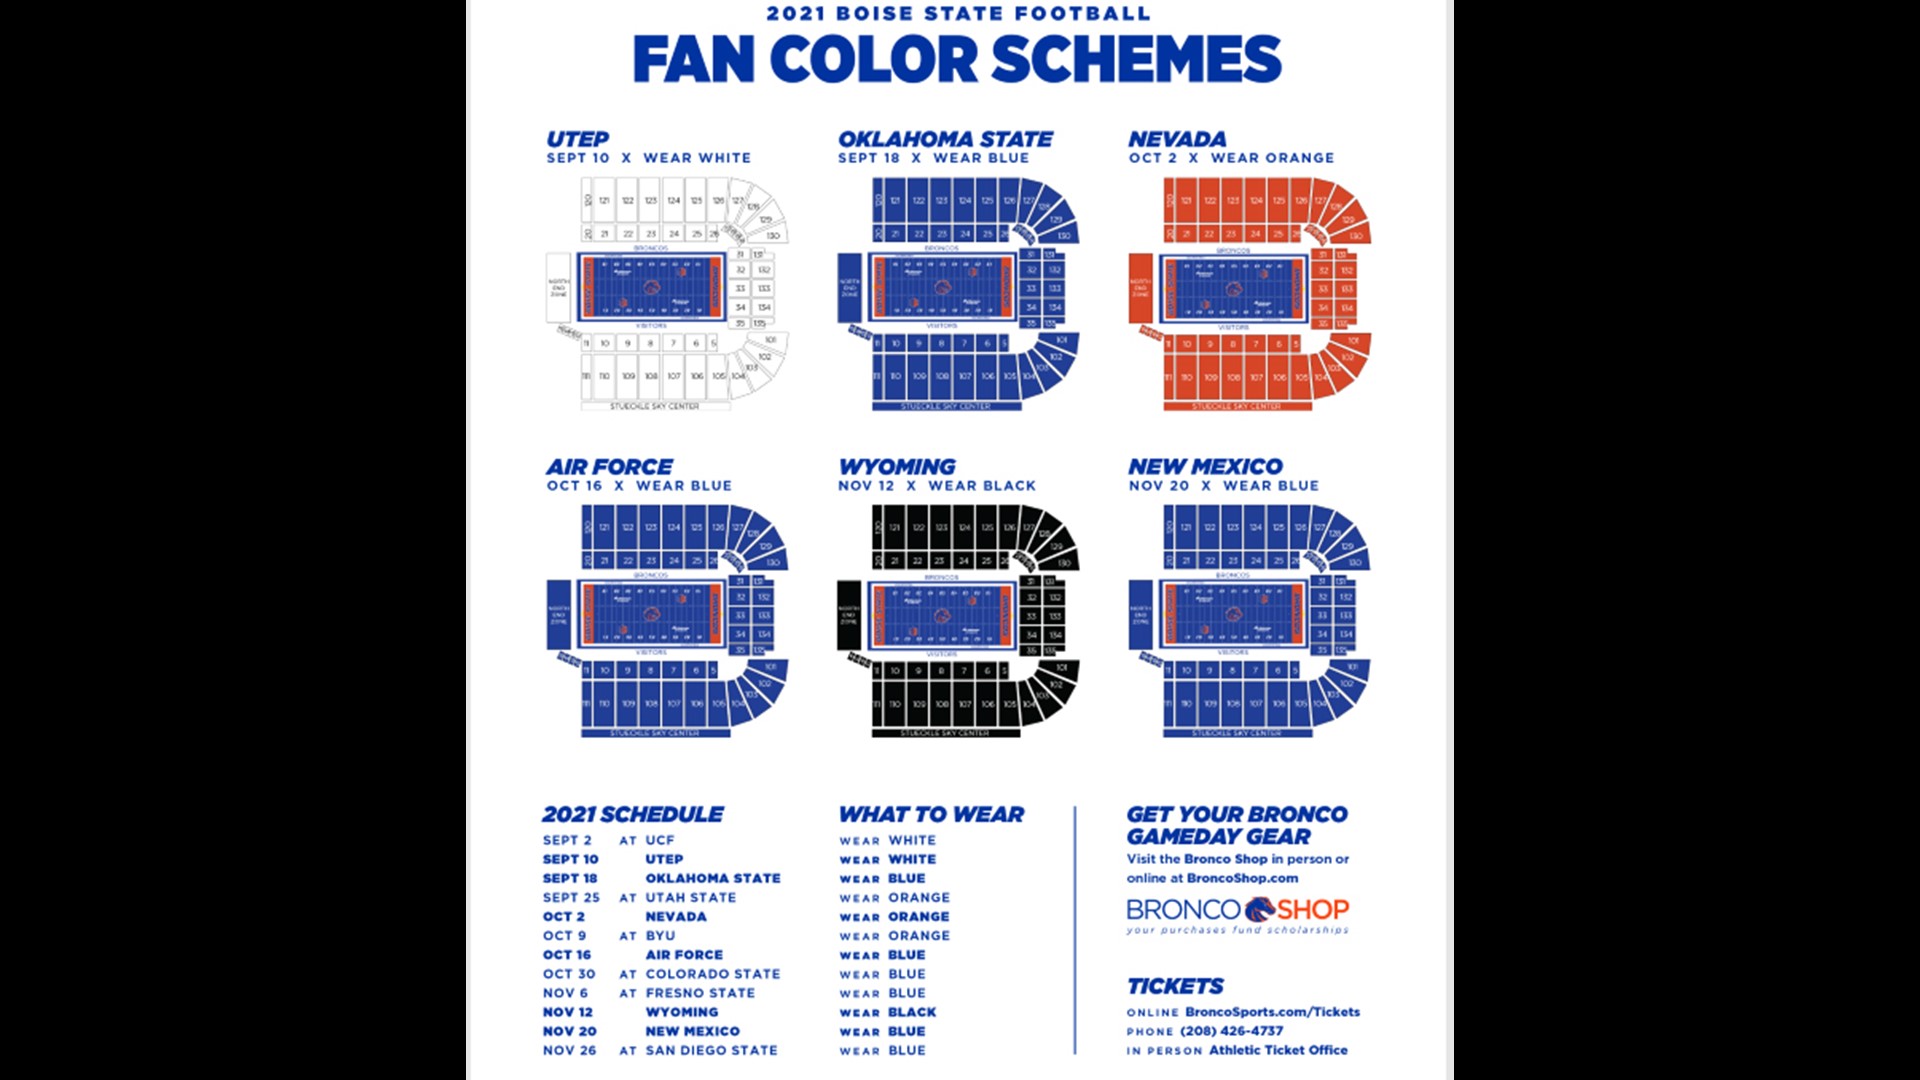 Boise State releases color schemes for each of its home games